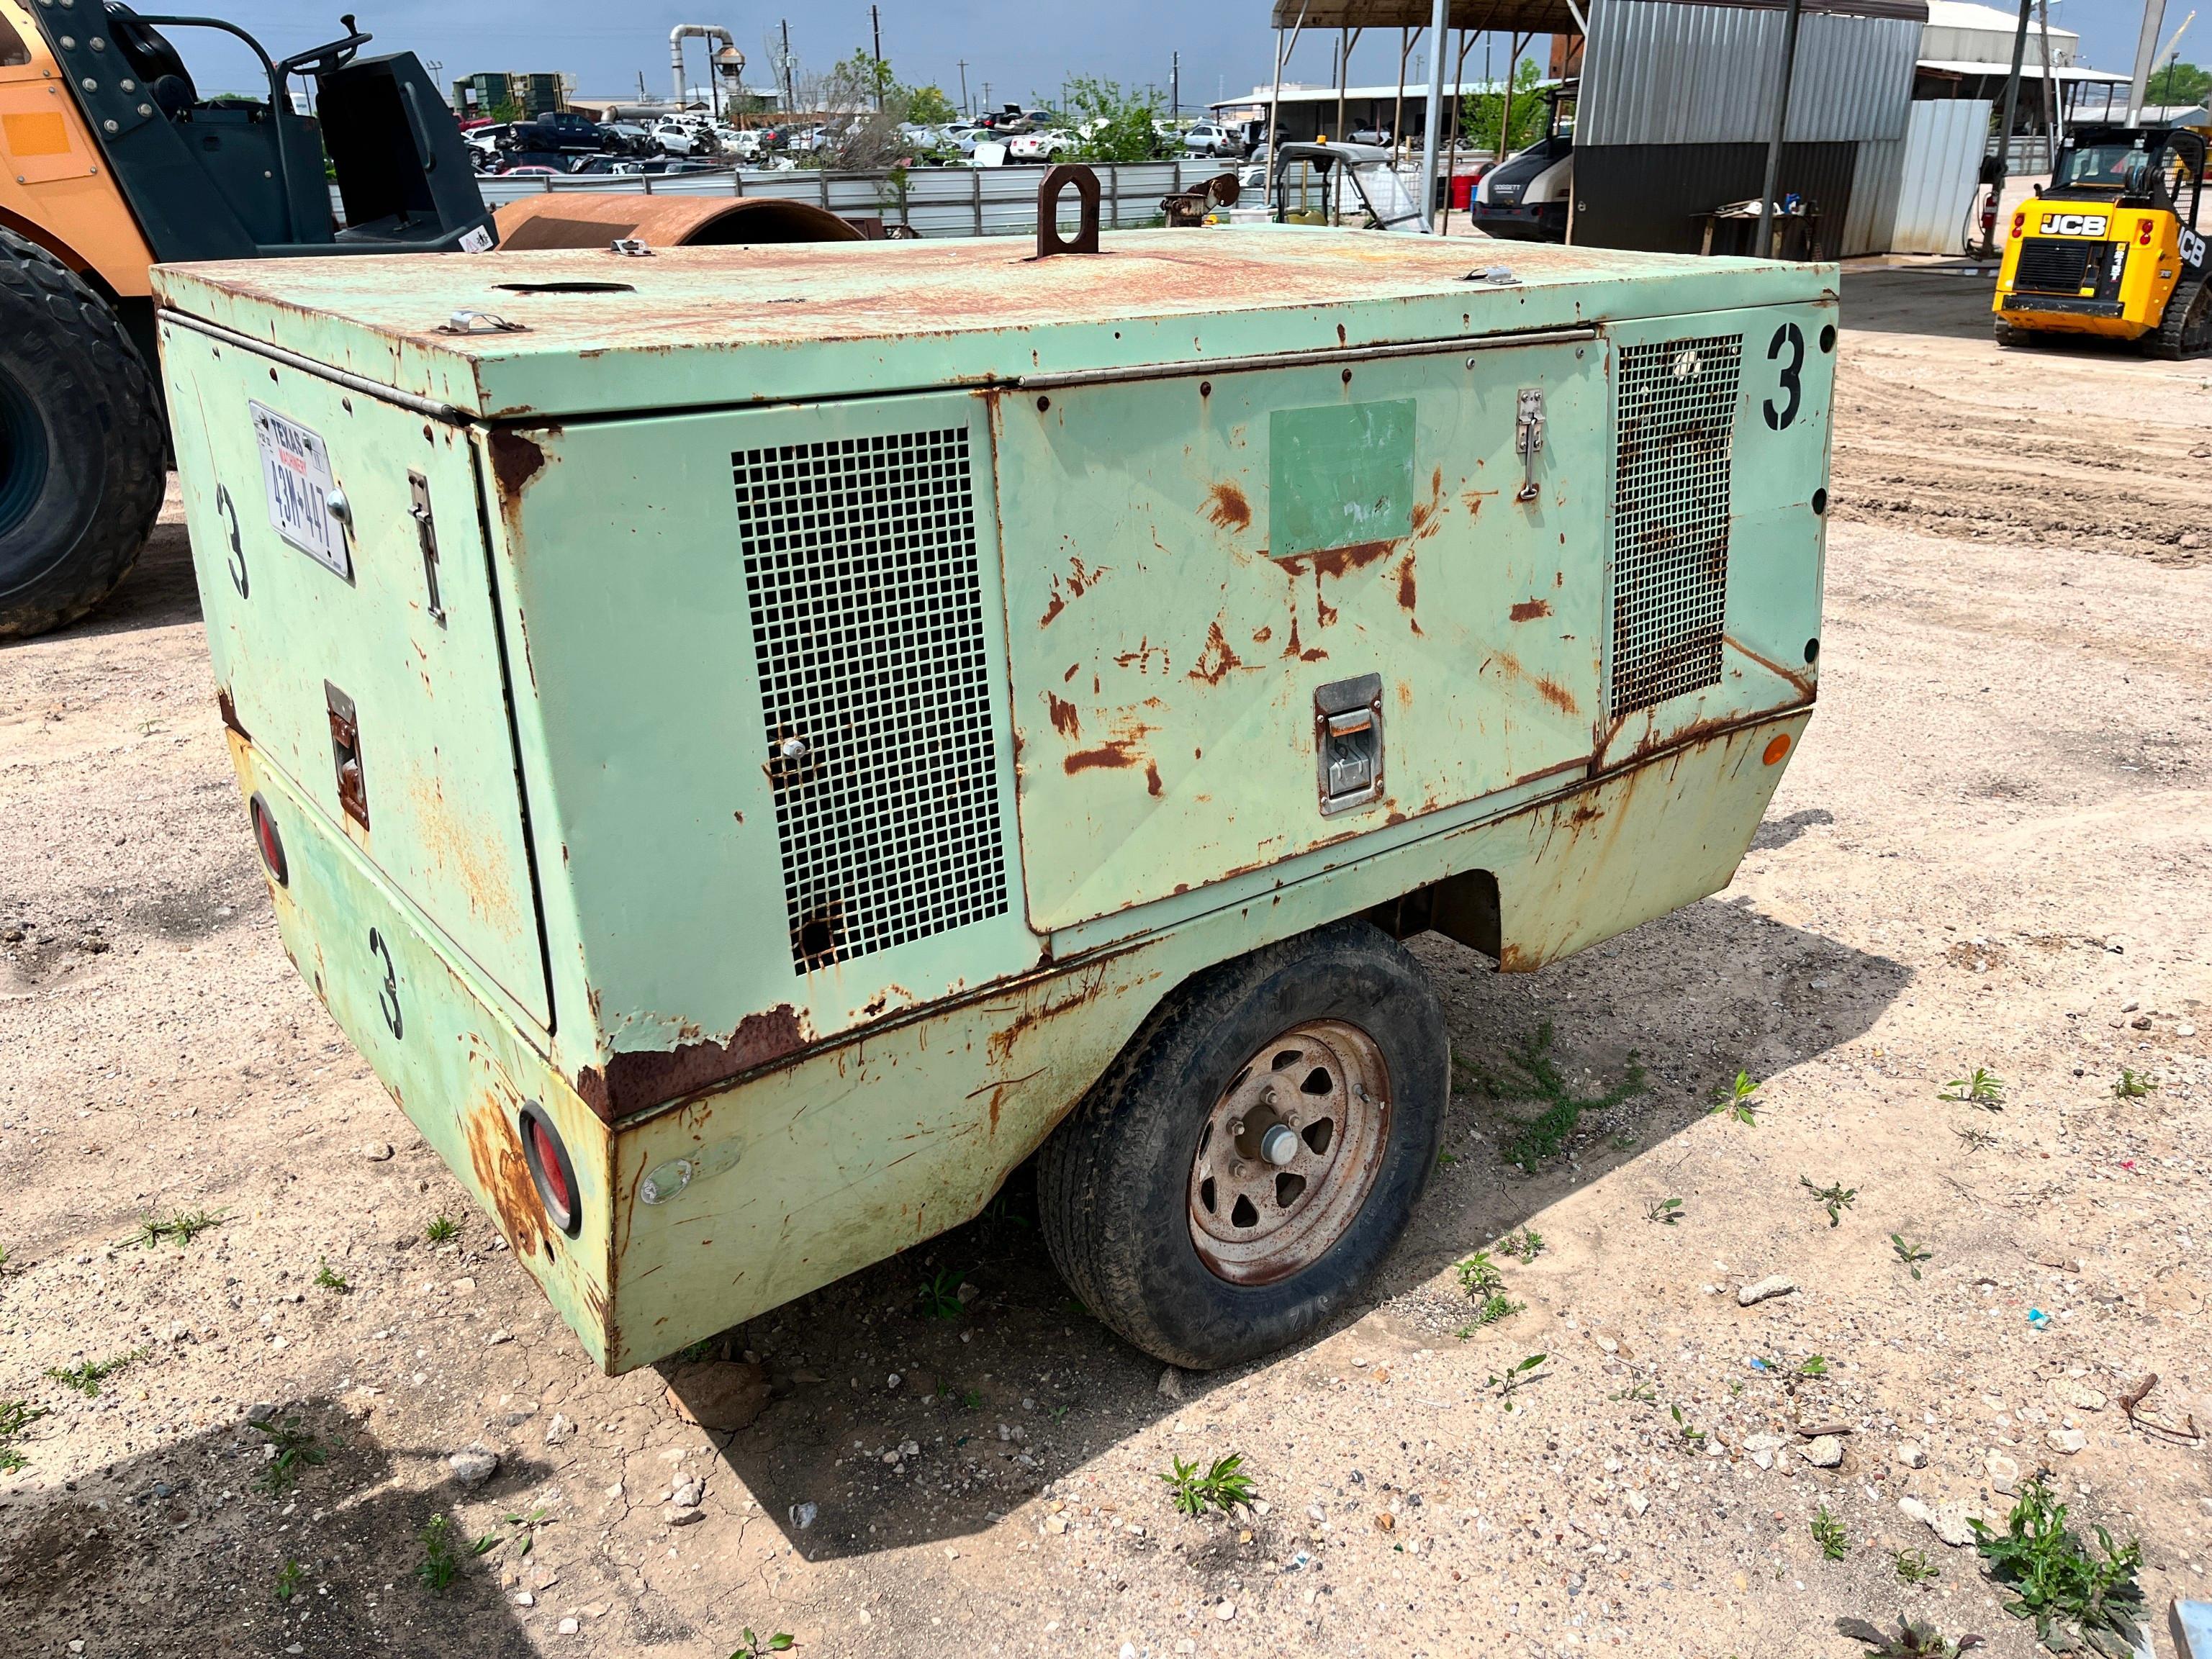 SULLAIR 185DPQ AIR COMPRESSOR SN:123869 powered by John Deere diesel engine, equipped with 185CFM,